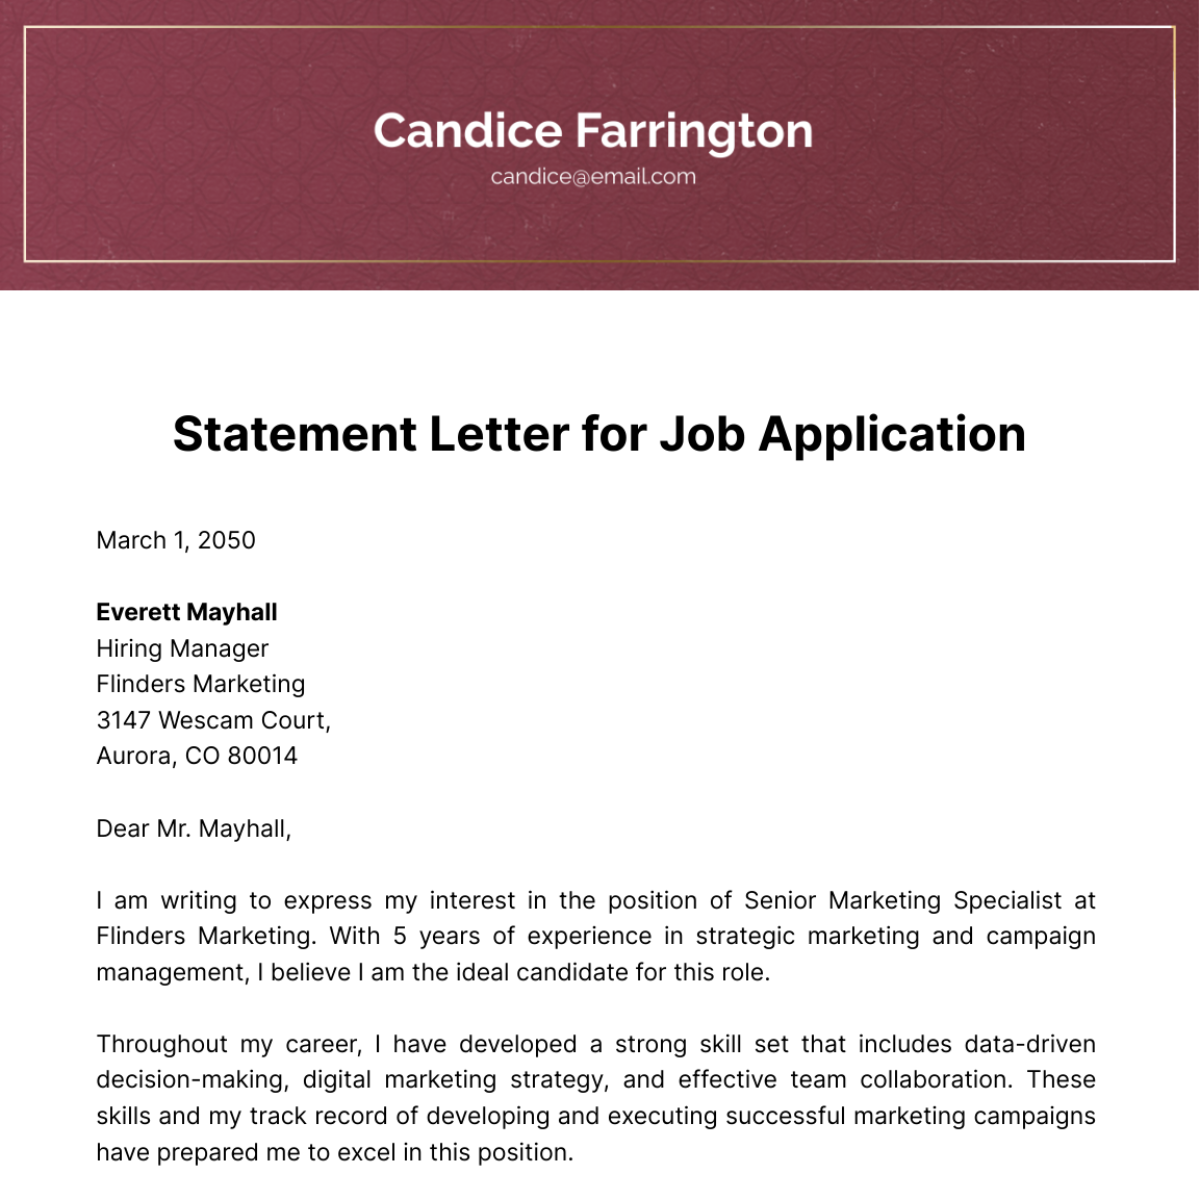 Statement Letter for Job Application Template